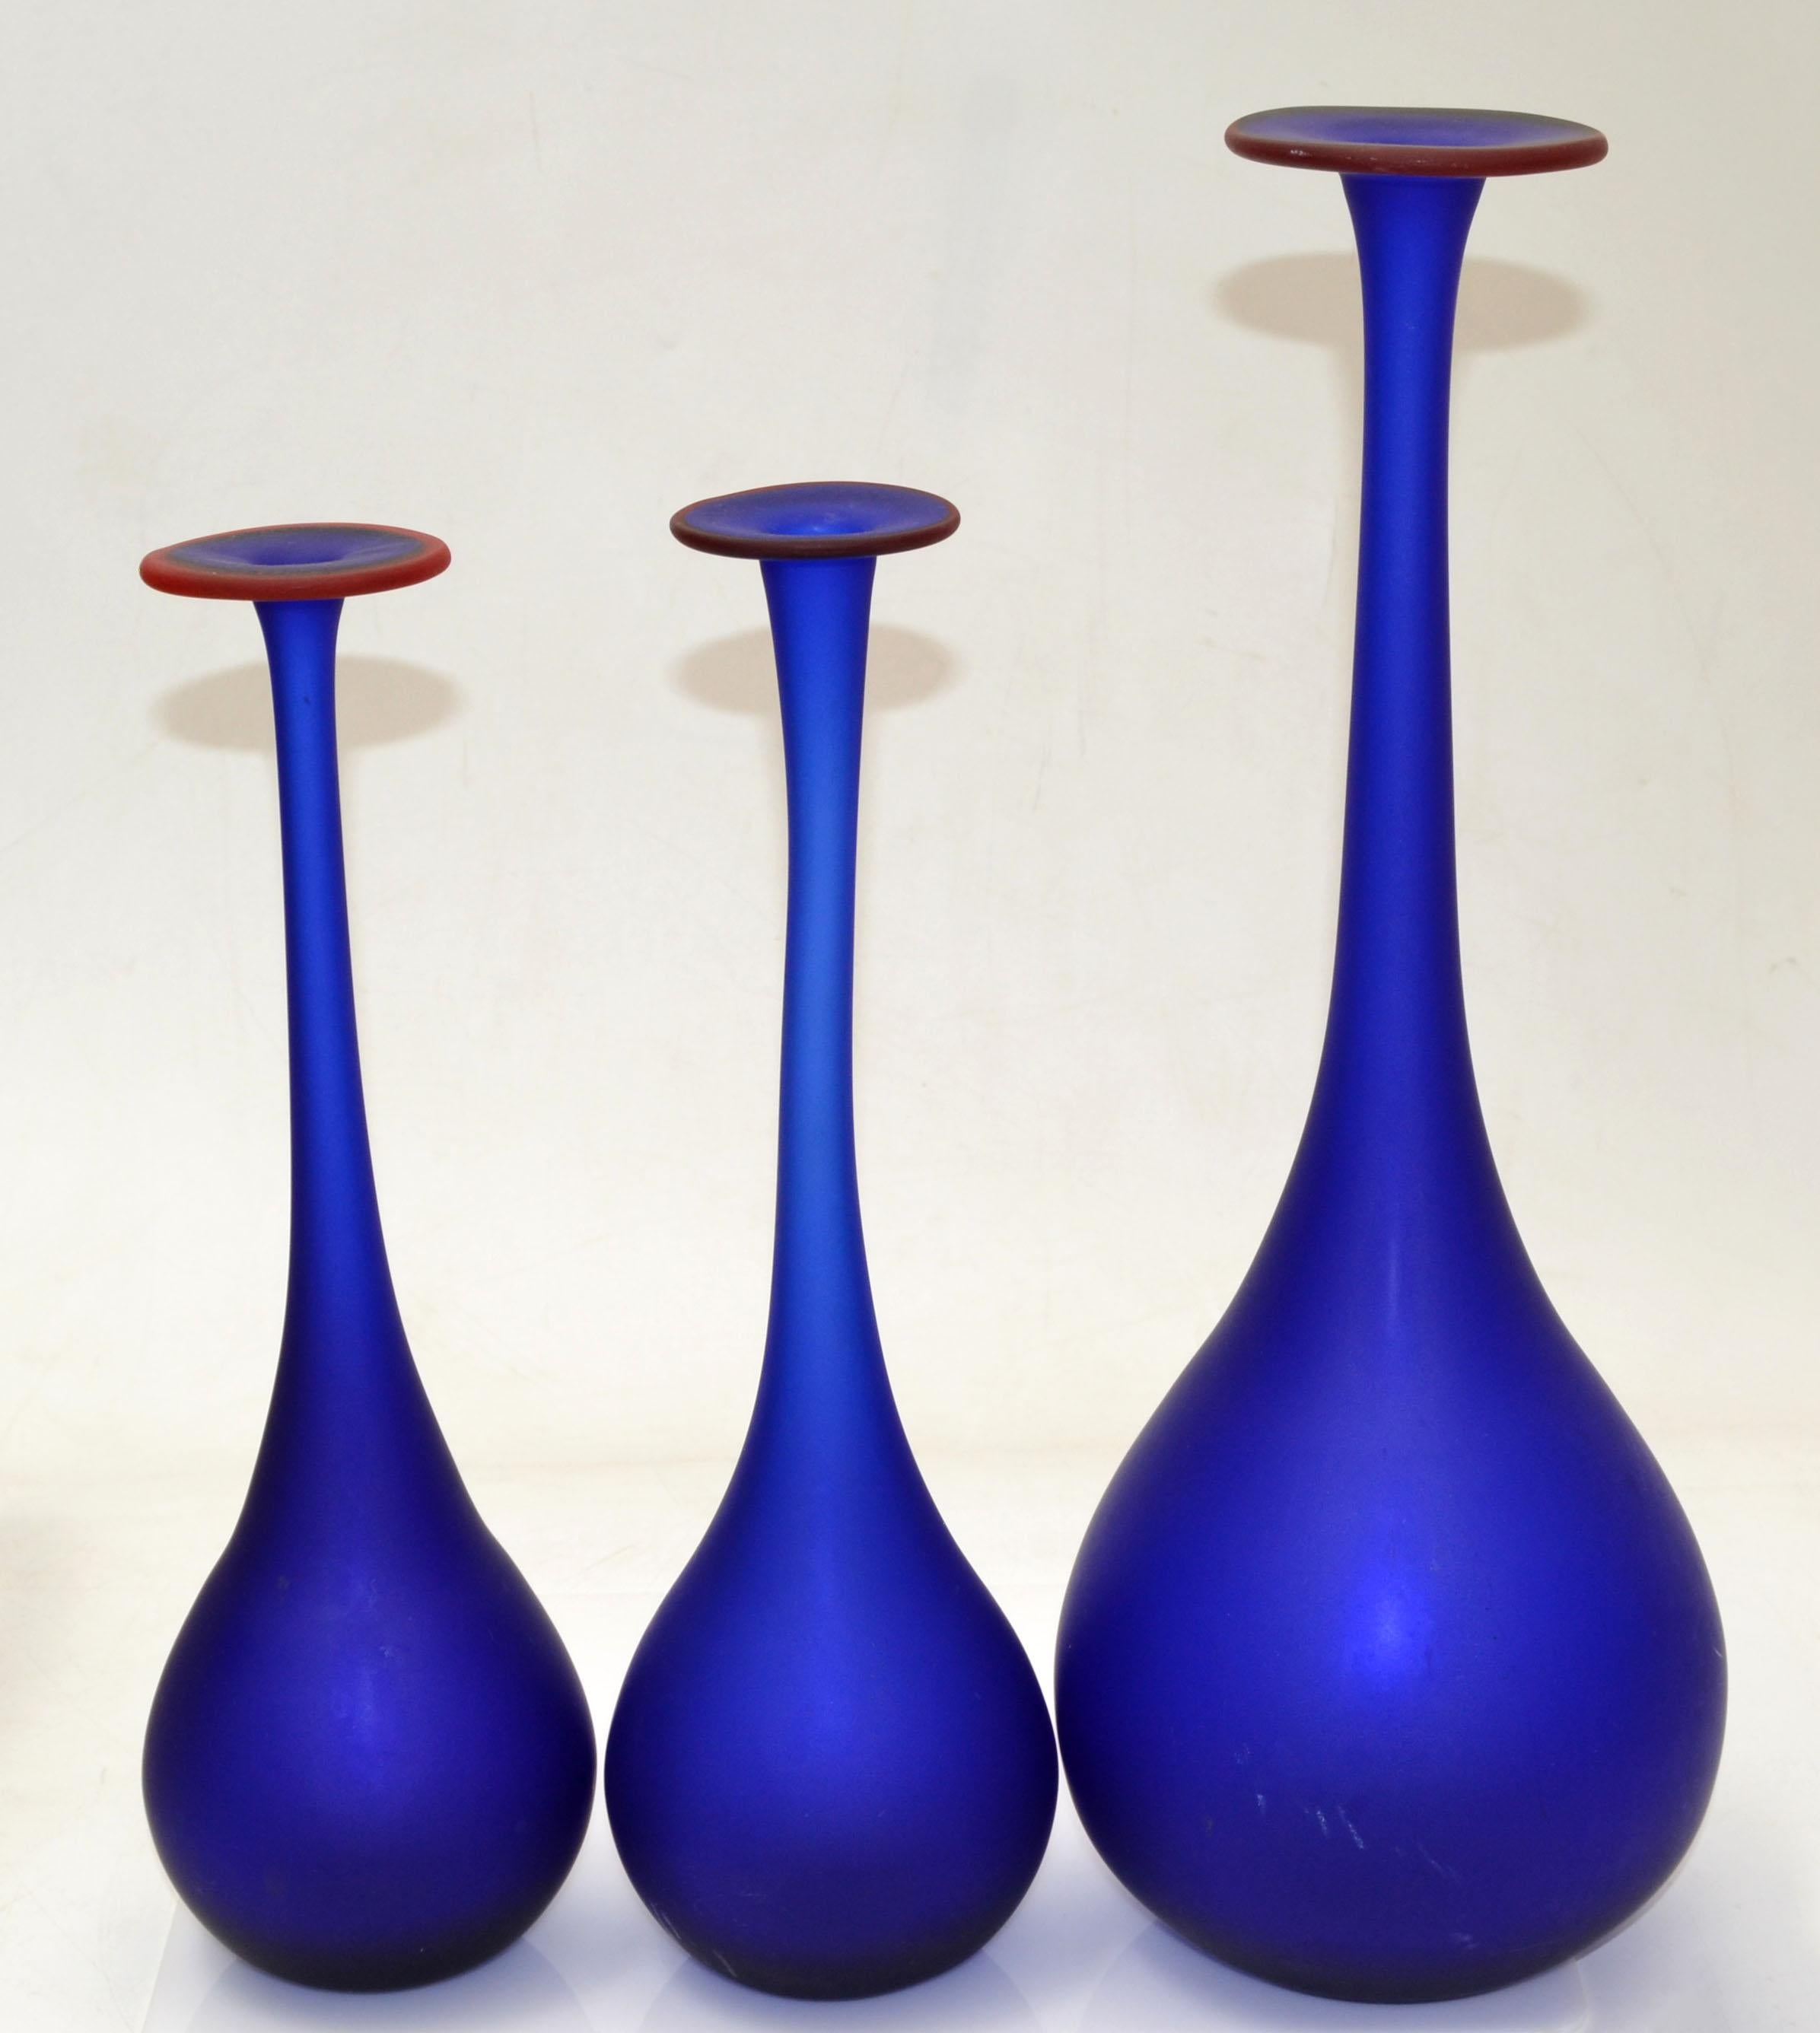 Set of 3 Carlo Moretti Style Mid-Century Modern satin glass bud vases in translucent blue with a red opening.
Nesting set, the smaller ones are 3.5 inches in diameter, height 11.5 & 12 inches.
Very beautiful and clean design.

